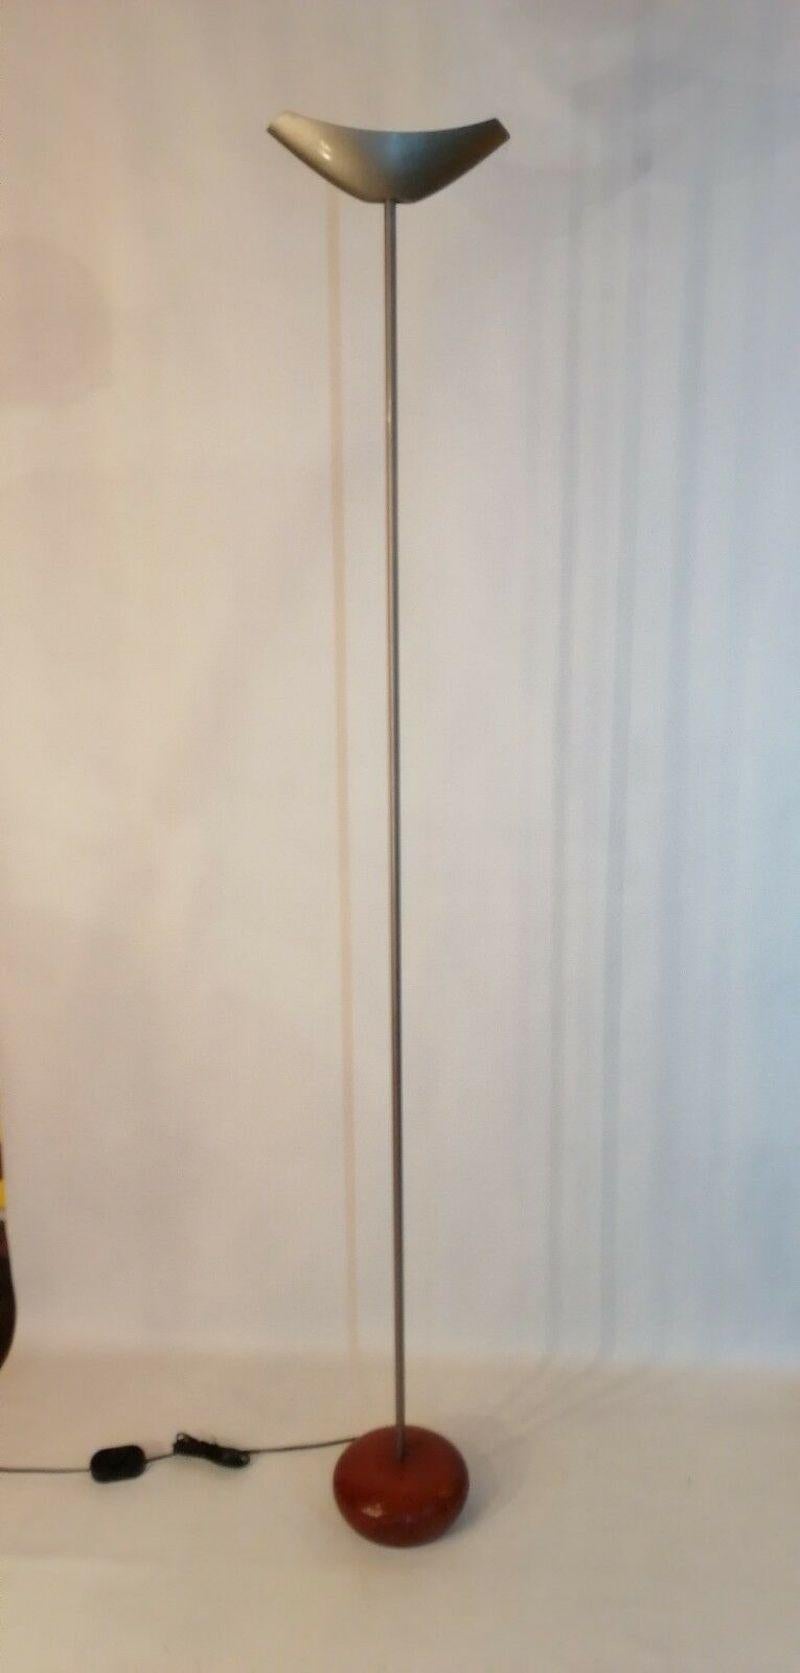 Original floor lamp flos arteluce production, servul F model, designed in 1994 by josef LLuscà

Very good condition, as shown in the photos

Rare, unobtainable!.